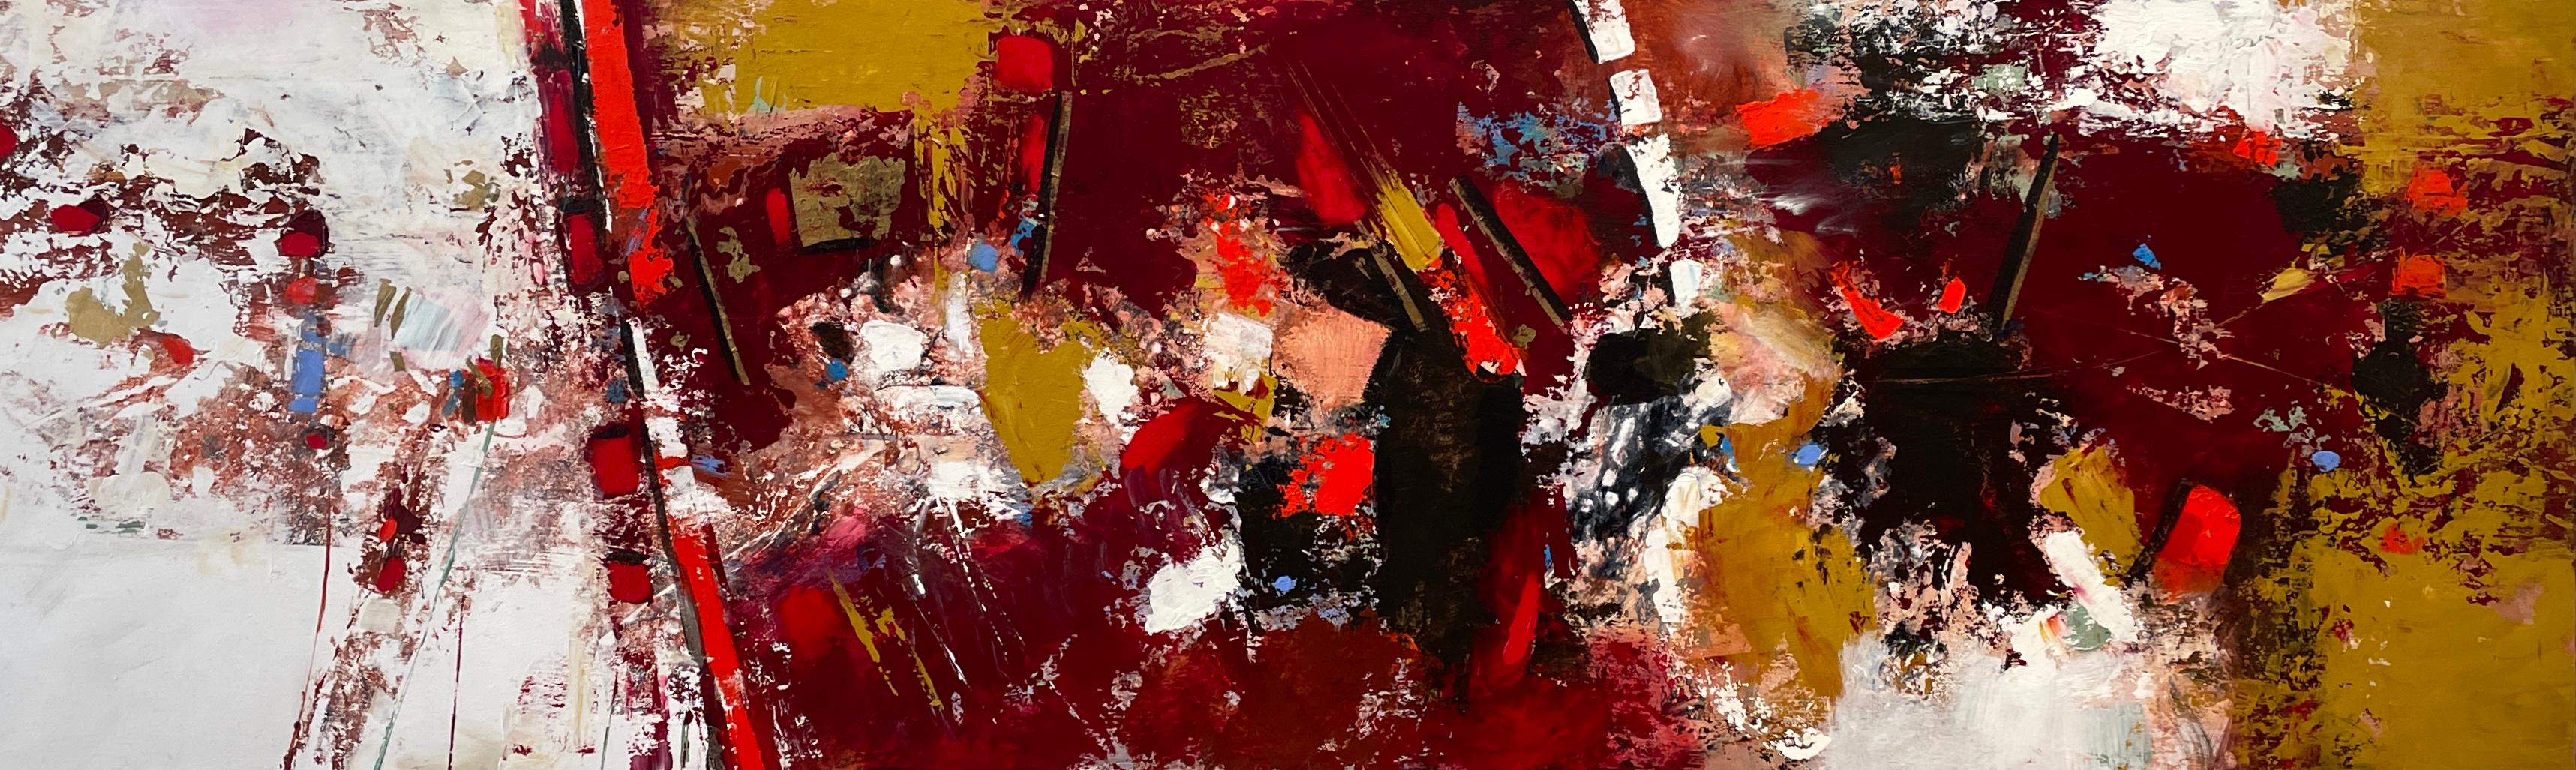 'Crosswalk' - Large Red, White, and Gold Contemporary Abstract by Mary Titus